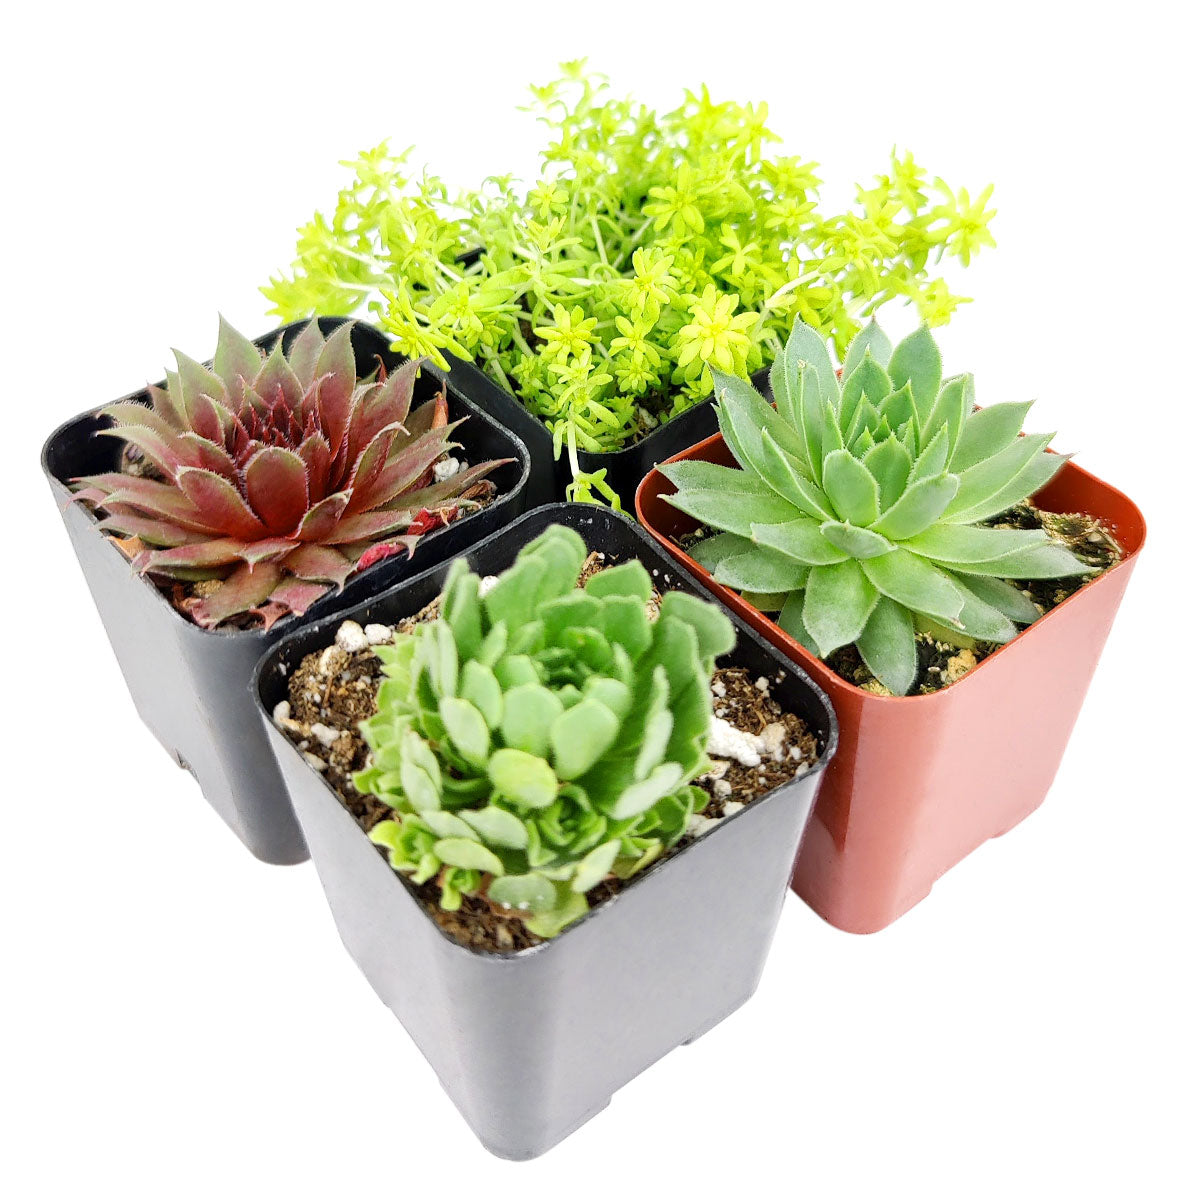 Winter Hardy Succulents Pack for sale, Caring for Succulents in Winter, Hardy Succulents, Cold Tolerant Succulents, Types of Outdoor Succulents for Extreme Cold Weather